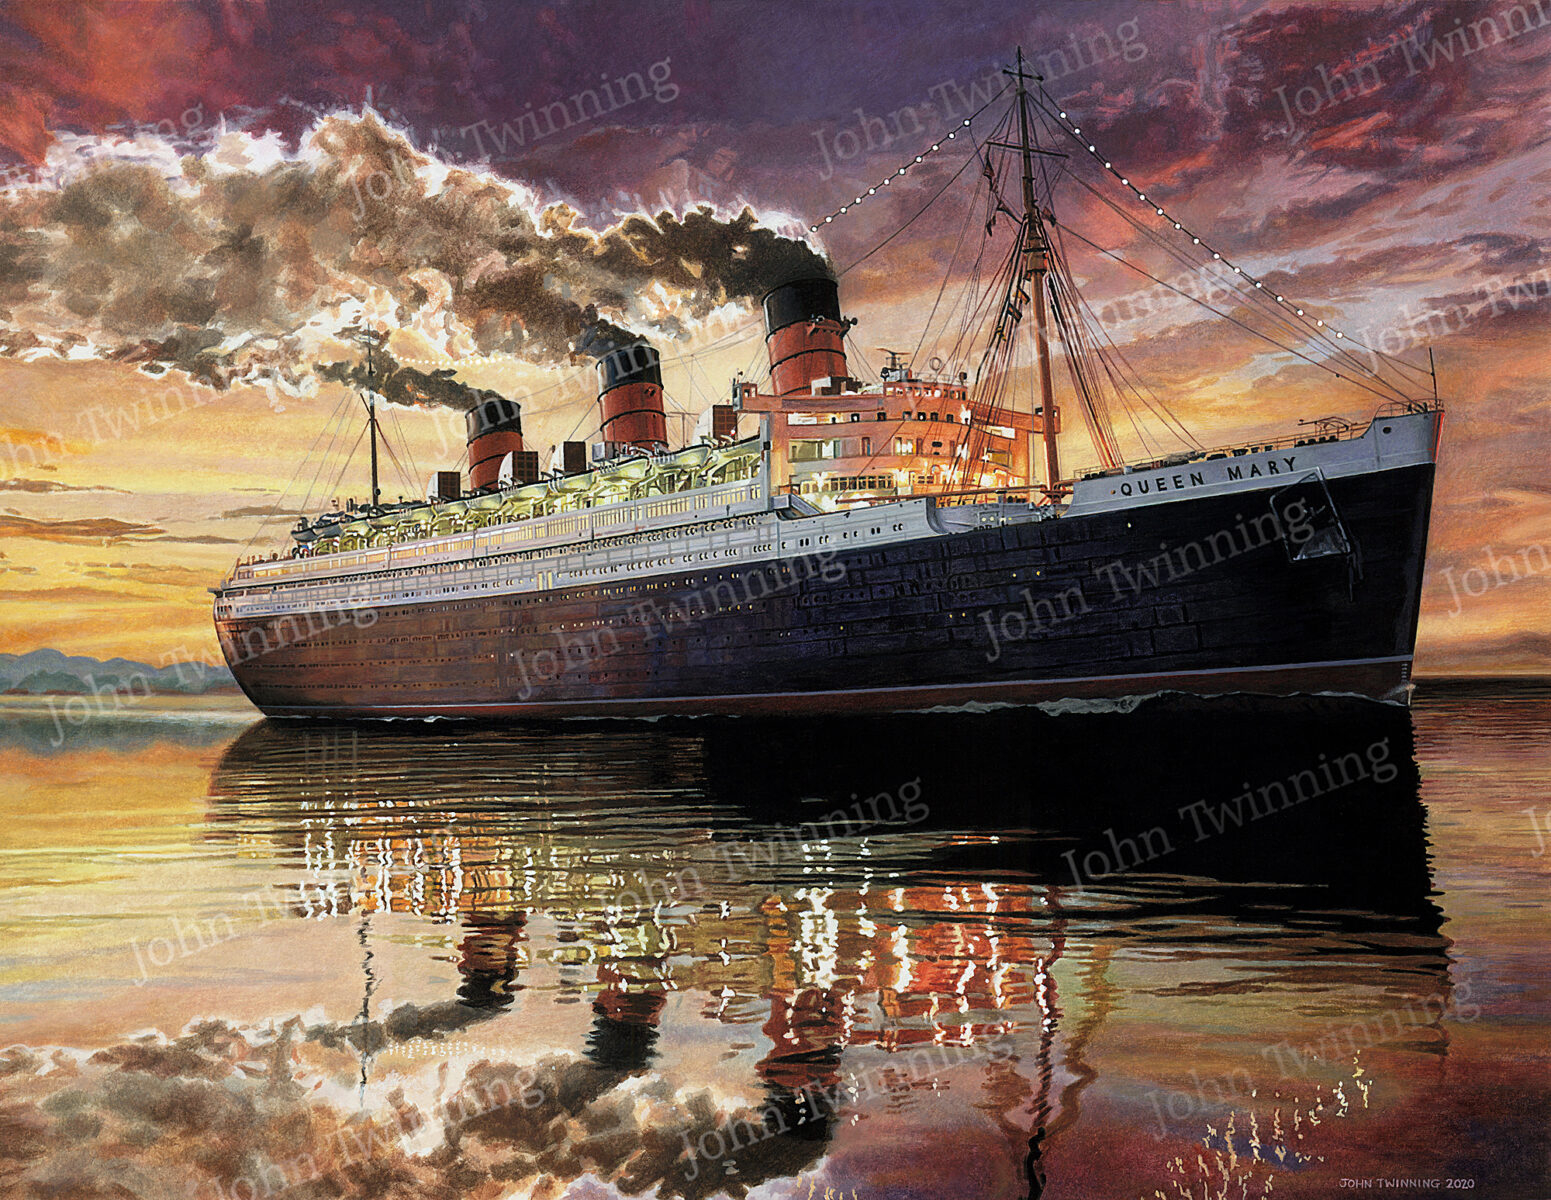 RMS Queen Mary, Sunset Sailing' - art print from a marine/maritime painting of this historic ship